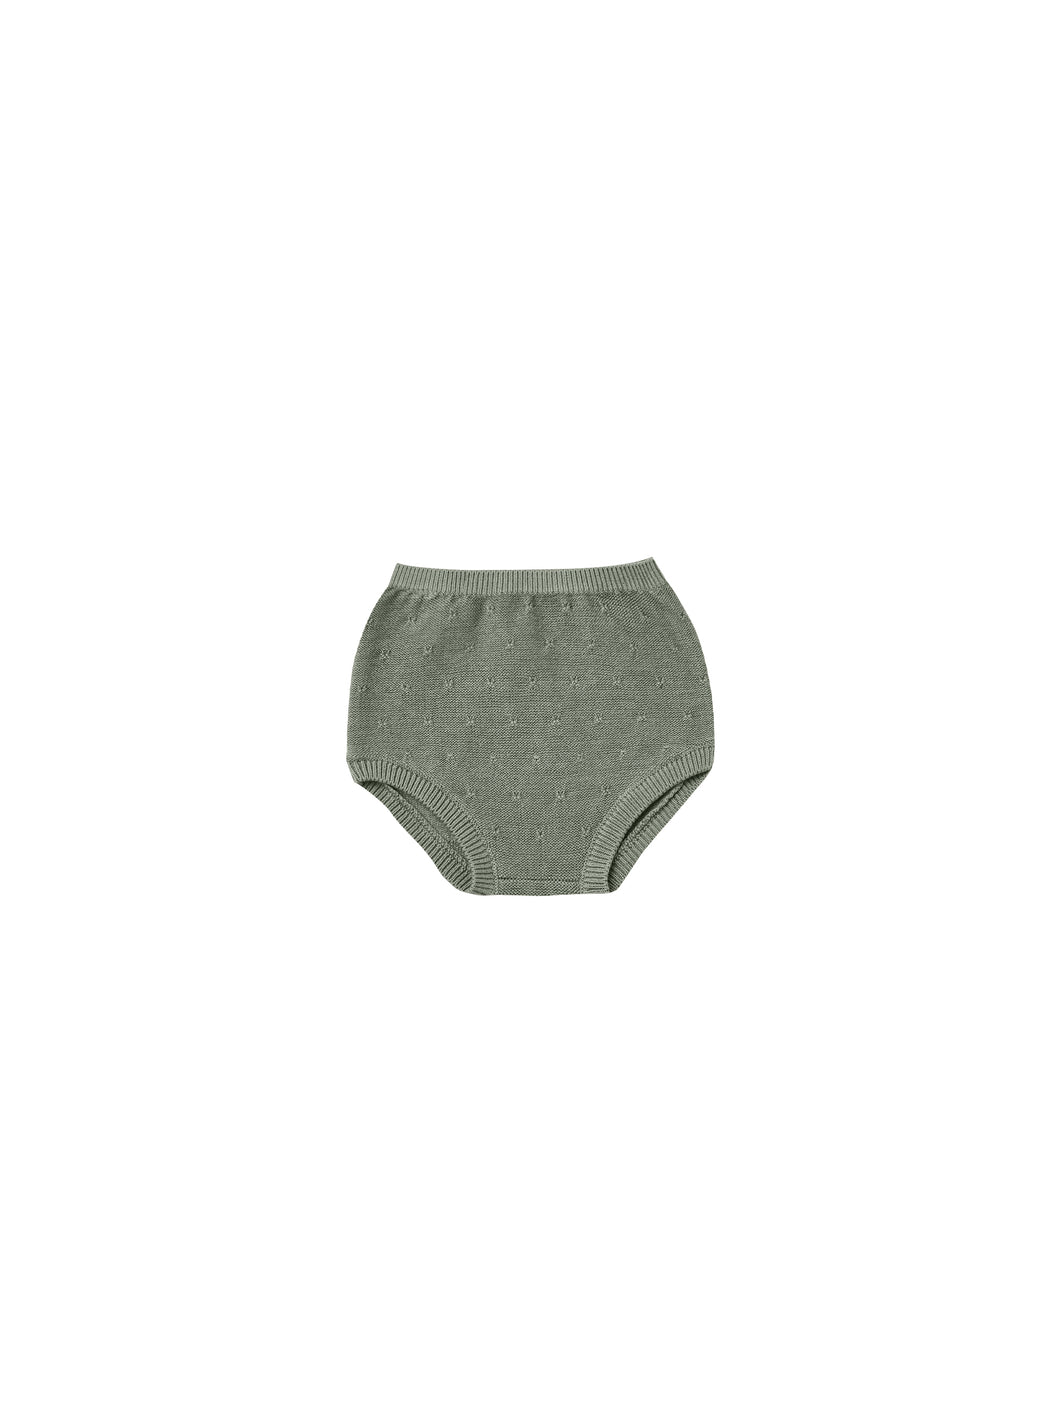 Quincy Mae knit bloomers - basil